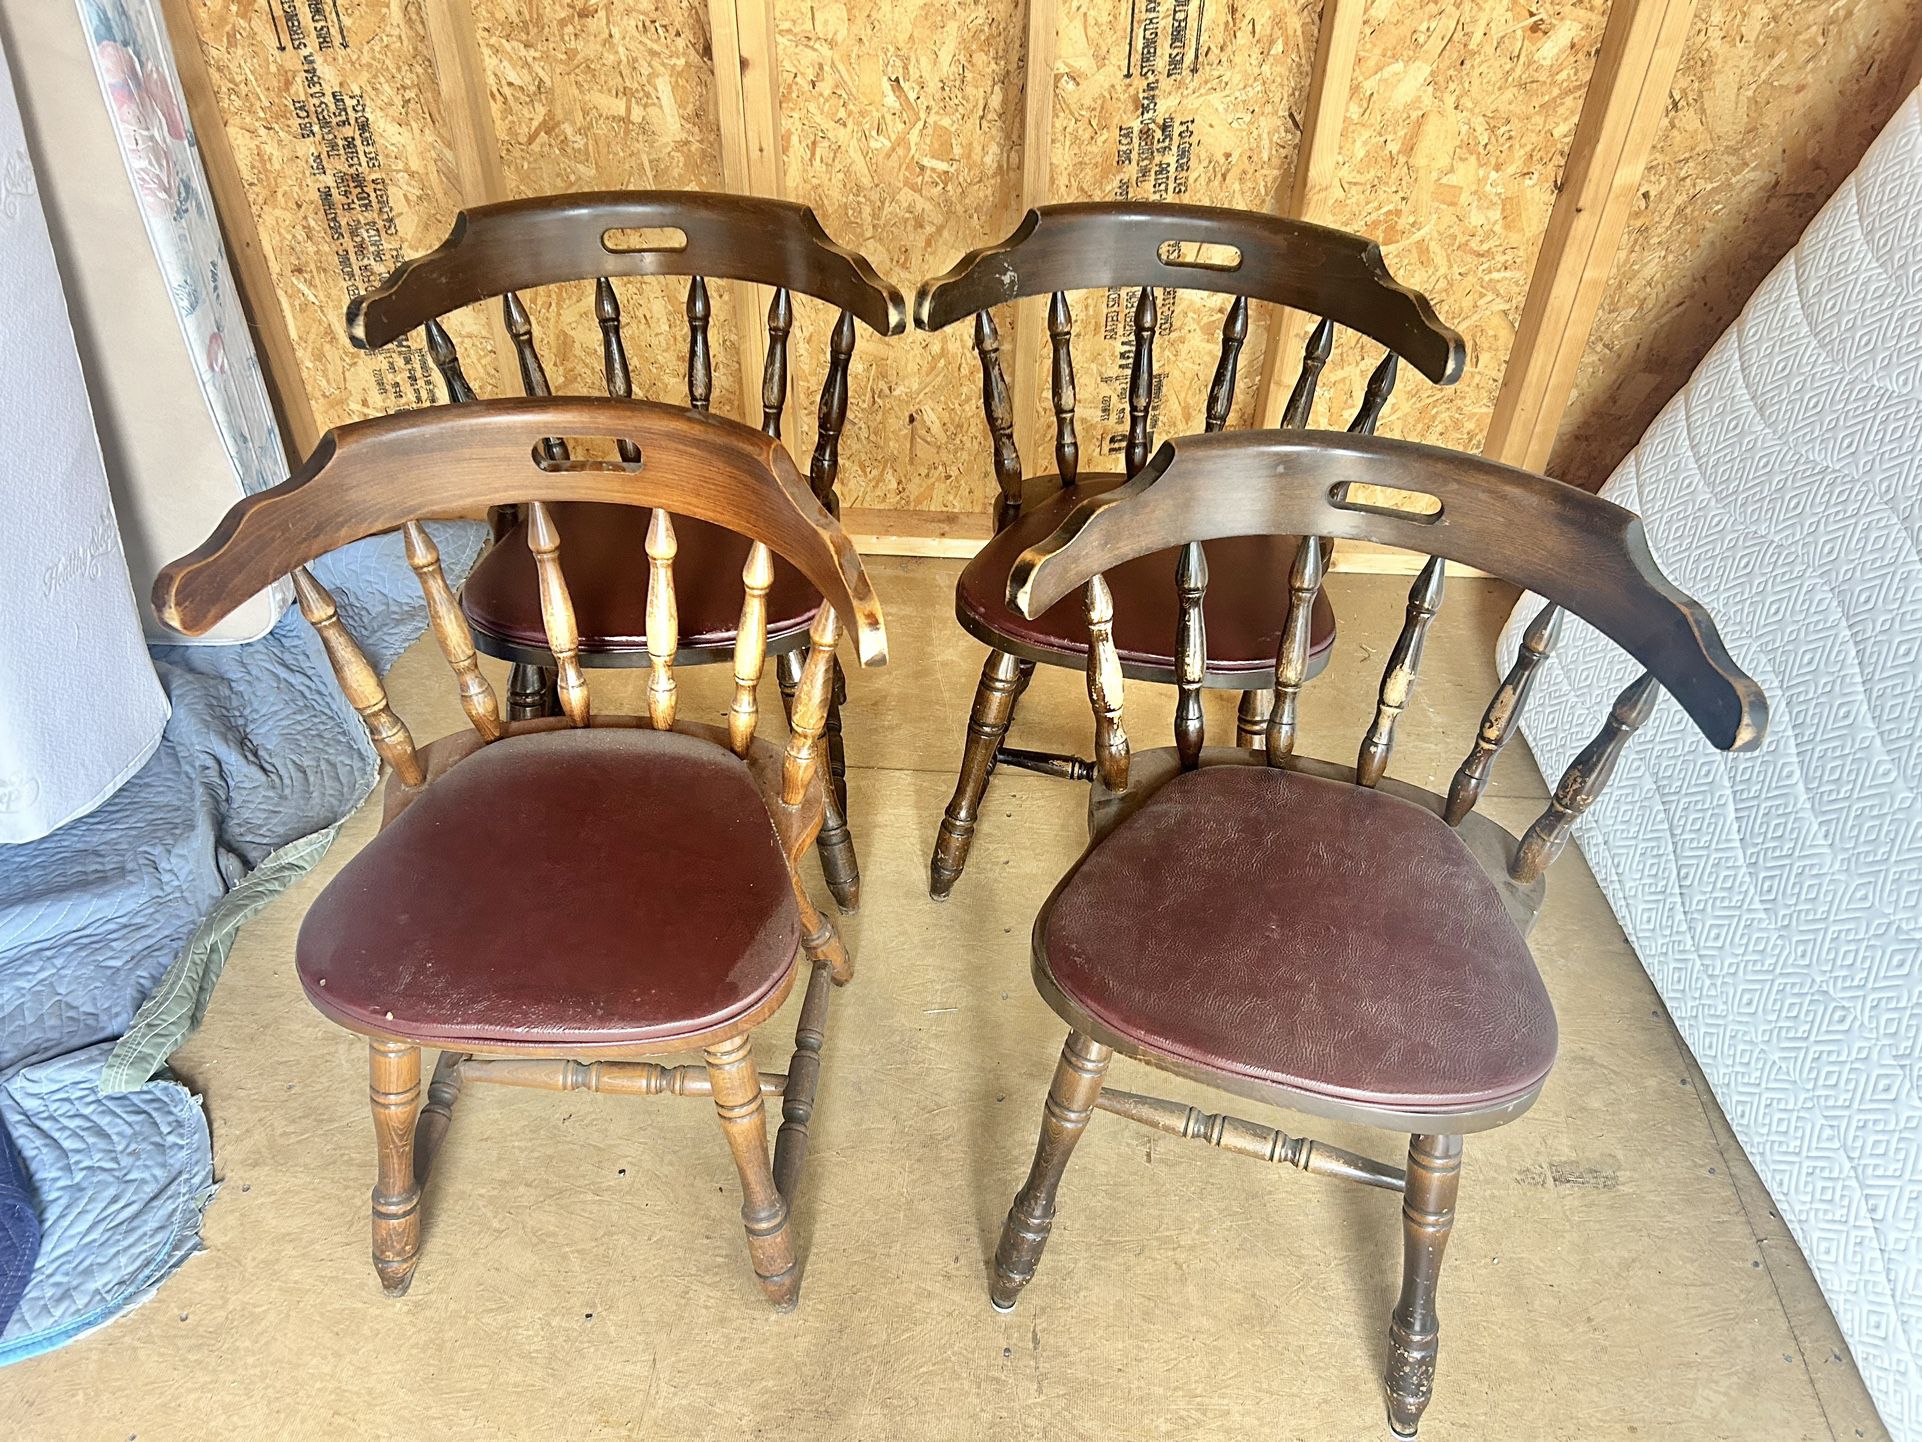 Set Of 4 Solid Wood Chairs